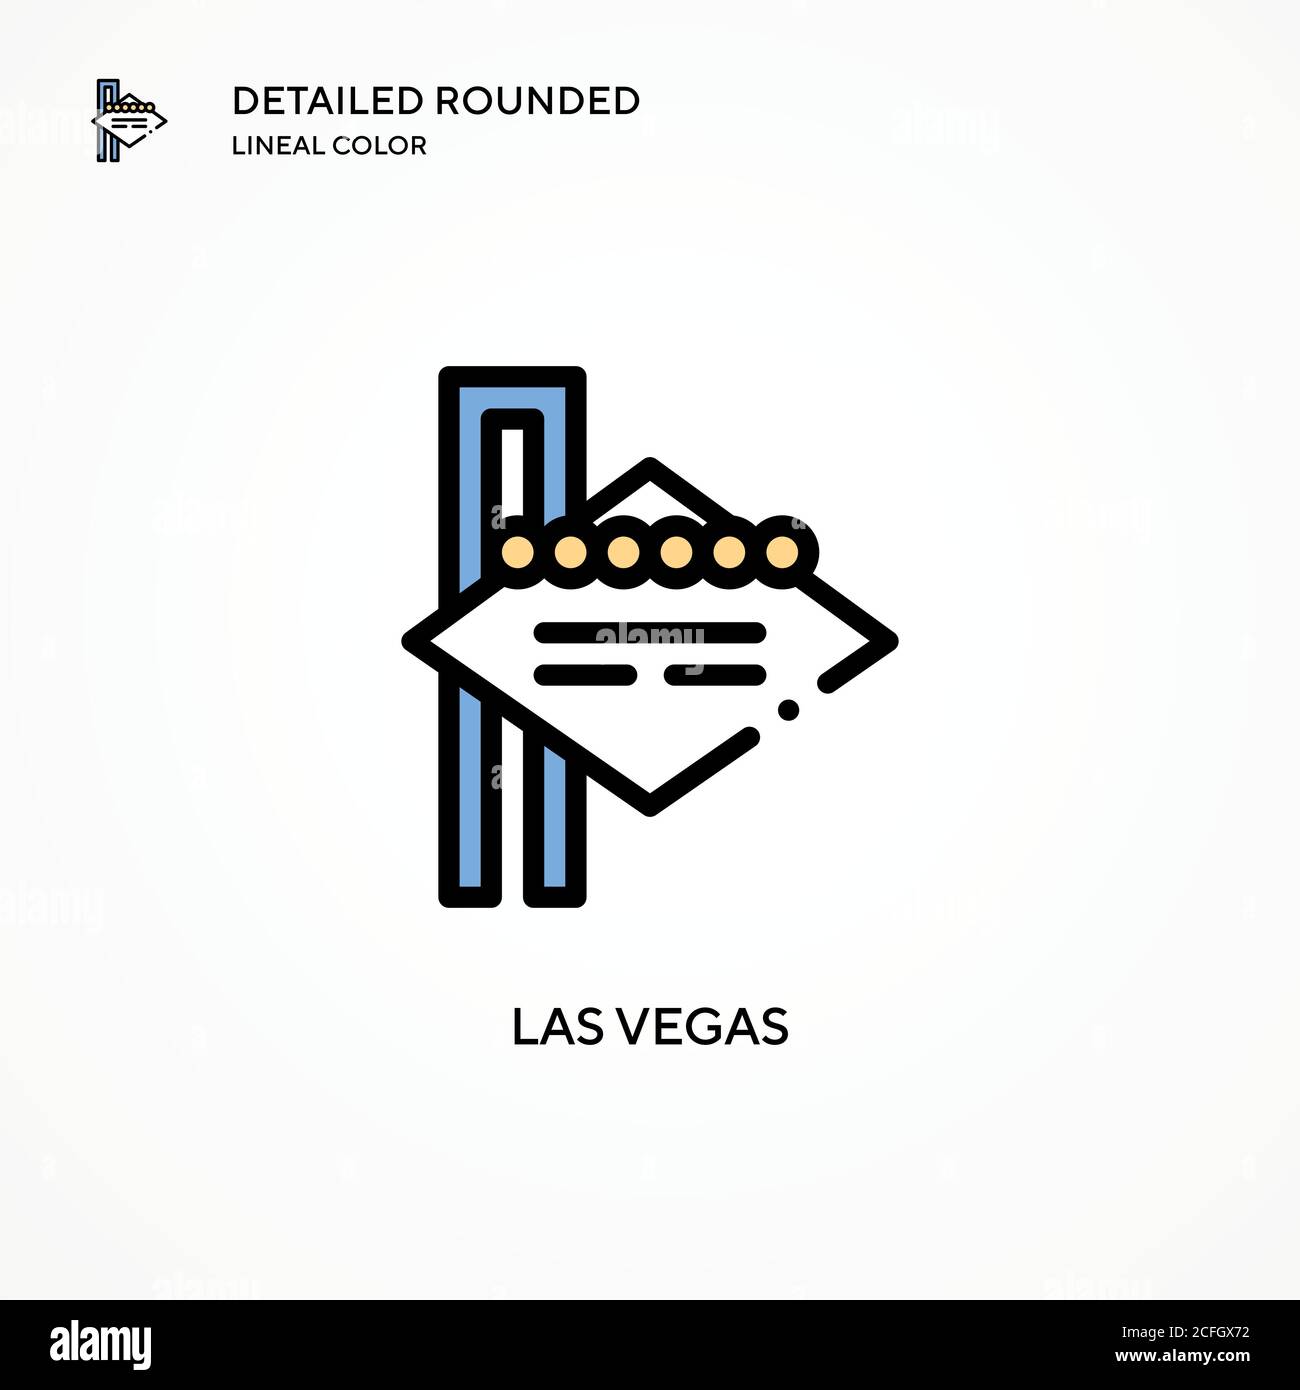 Las vegas vector icon. Modern vector illustration concepts. Easy to edit and customize. Stock Vector